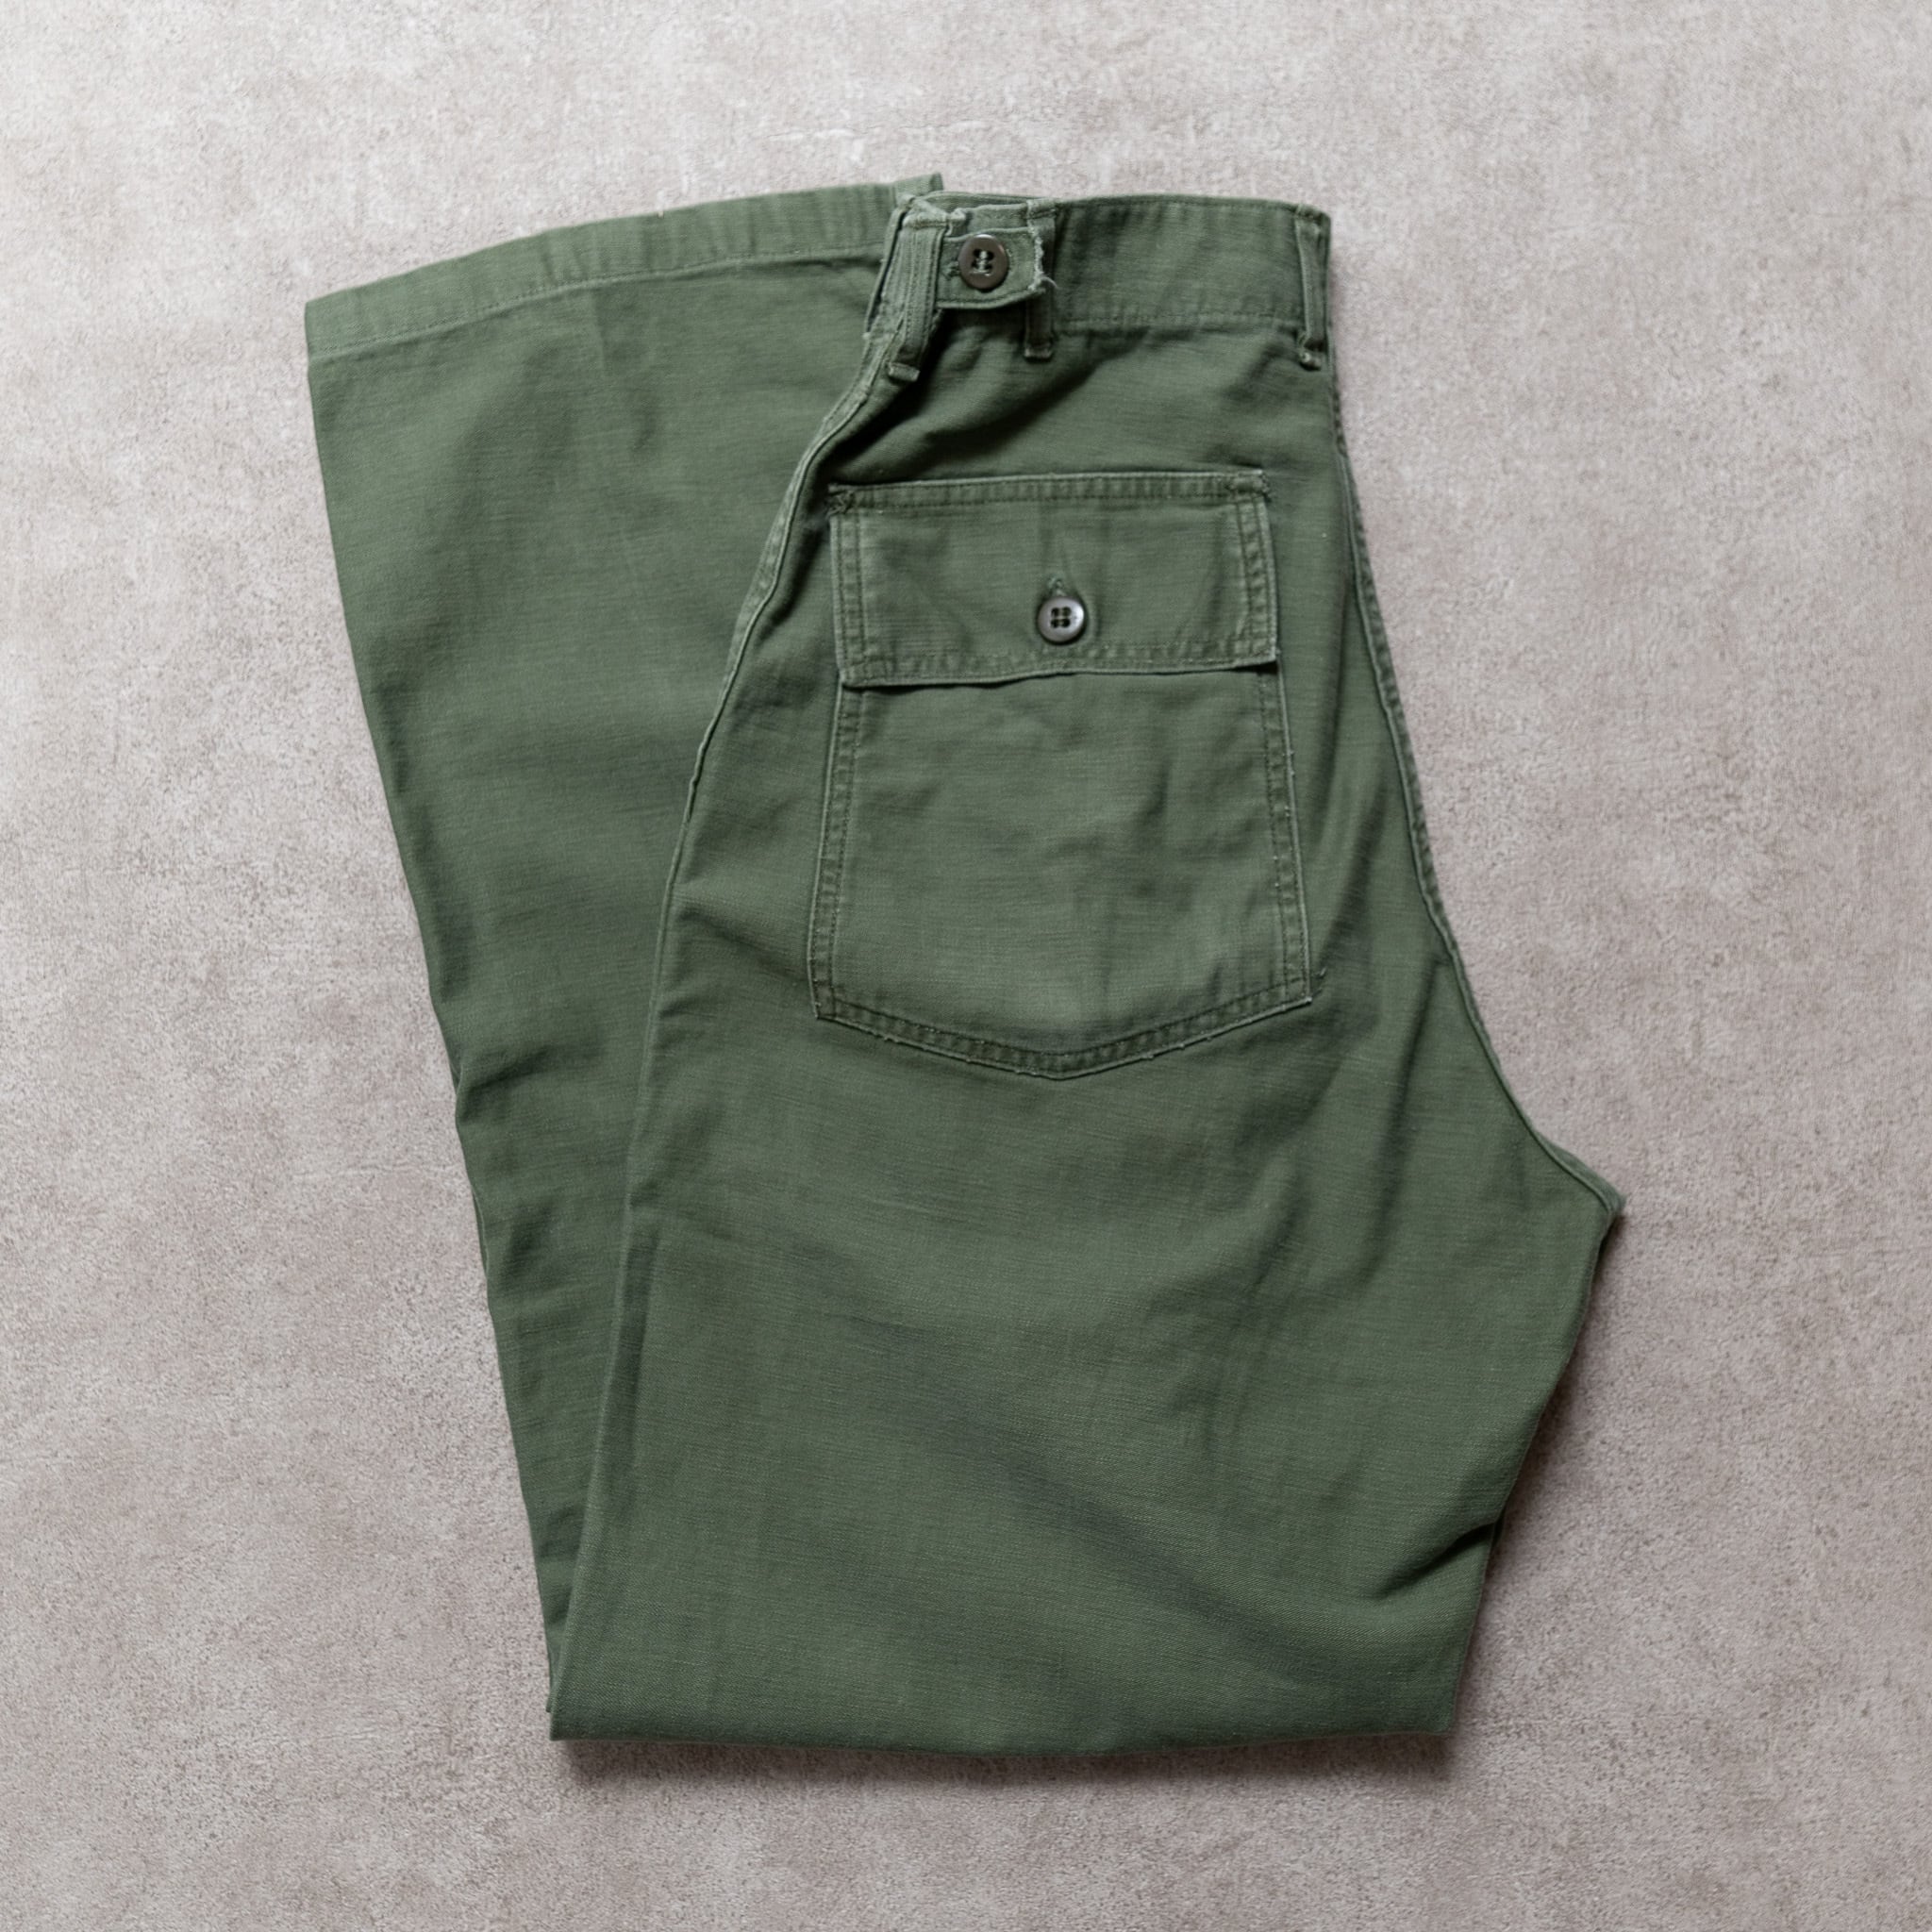 SMALL】U.S.Army Utility Trousers OG-107 実物 米軍 ベイカーパンツ 